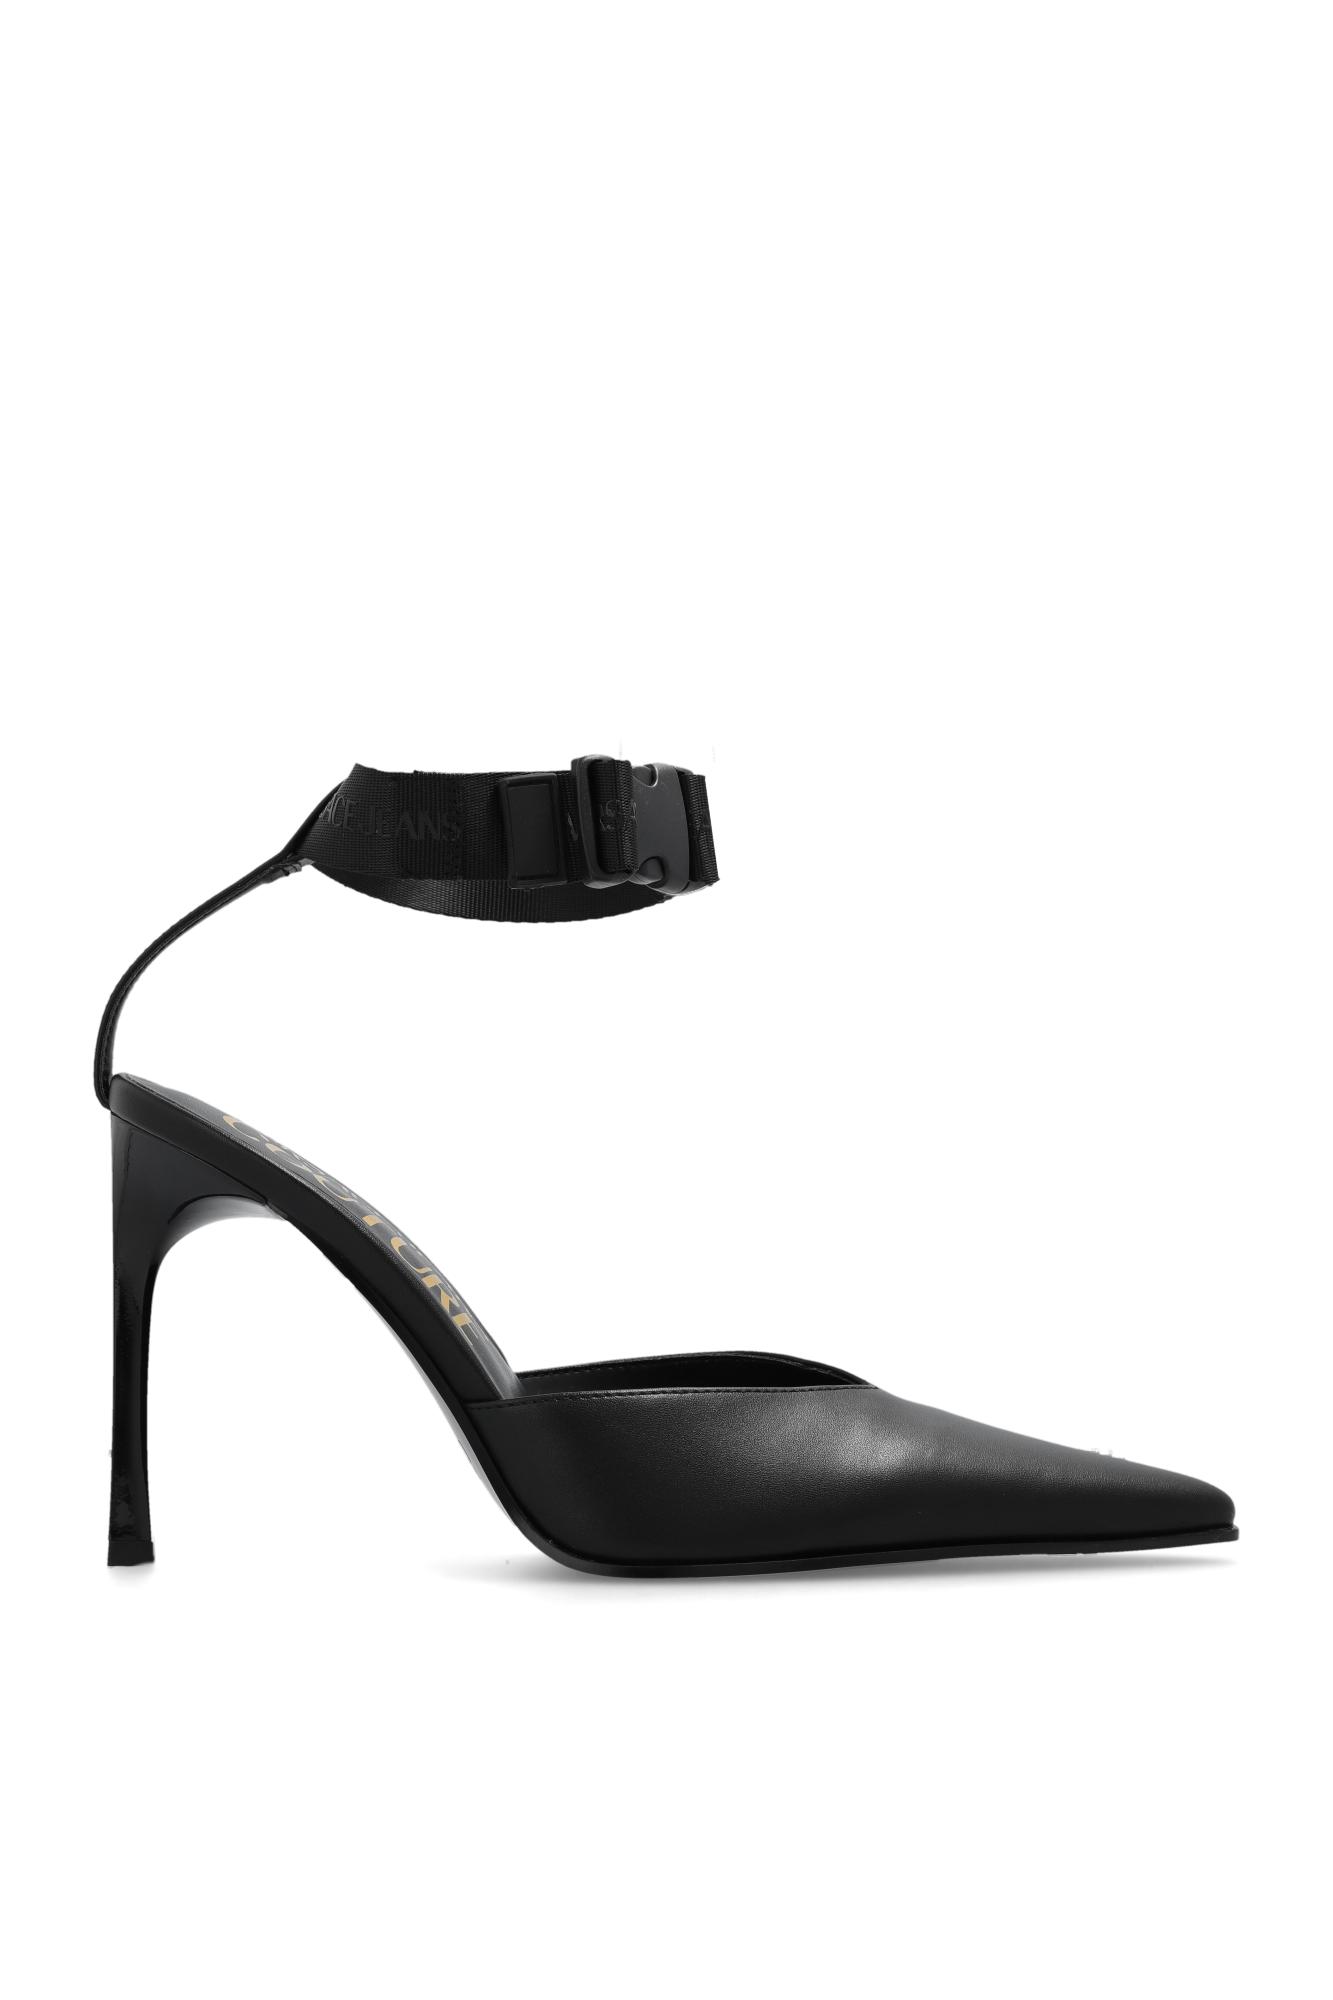 Black Spiked Pin-Point Heels by Versace on Sale